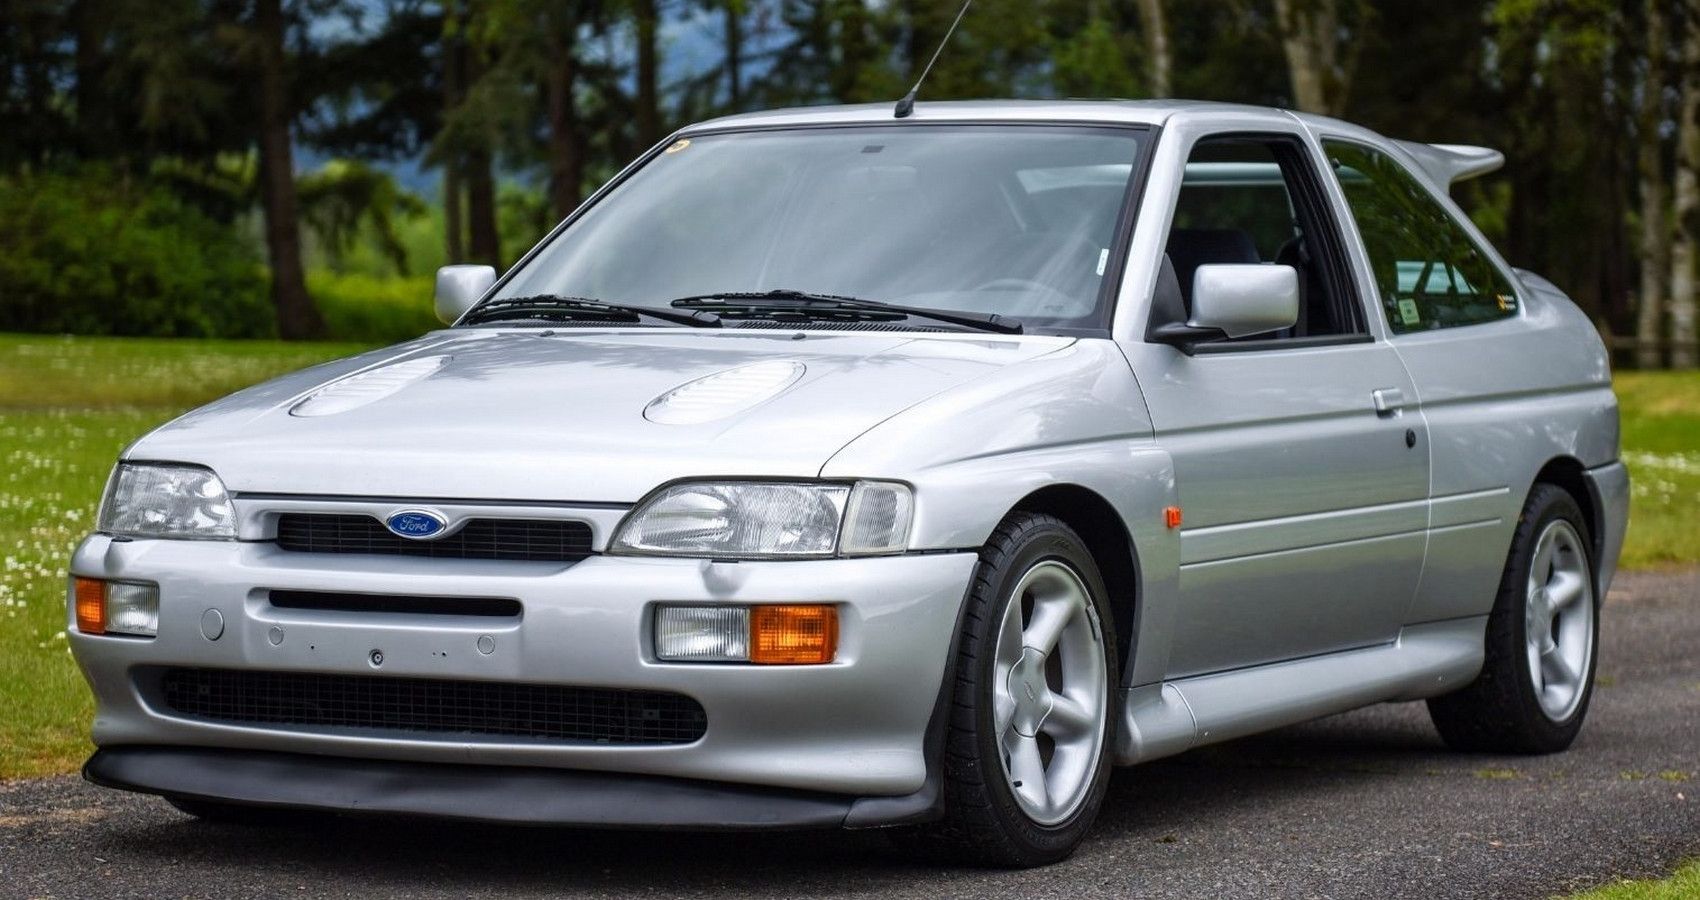 Silver Escort RS Cosworth on the road